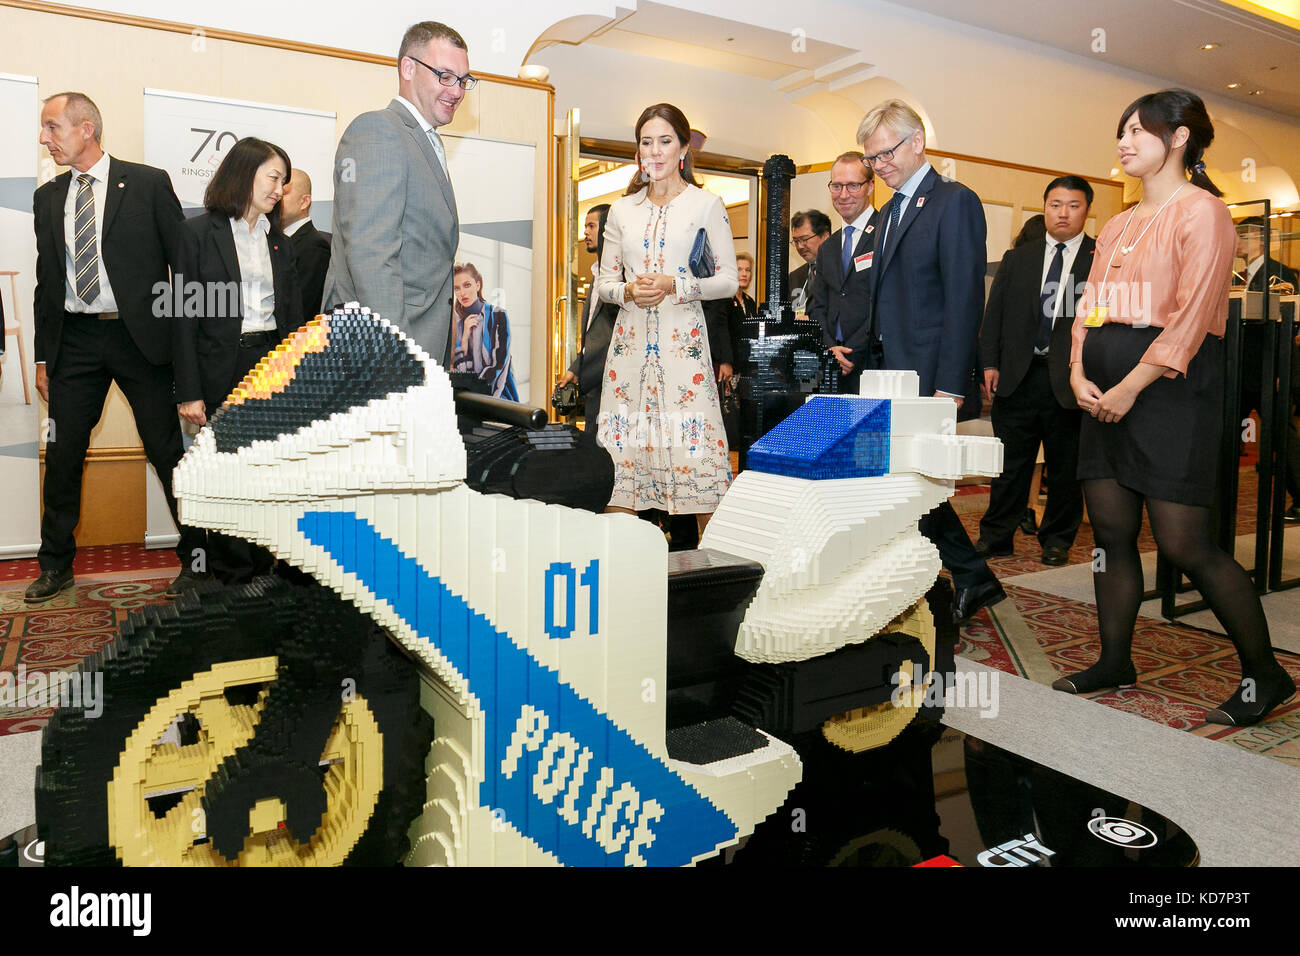 Tokyo, Japan. 11th Oct, 2017. Her Royal Highness the Crown Princess Mary Elizabeth Donaldson (C) looks at a Police motorcycle made of LEGO bricks on display during a business seminar at Hotel Gajoen Tokyo on October 11, 2017, Tokyo, Japan. The Danish Crown Prince Couple hope to cement business relationships between Japan and Denmark during their visit celebrating 150 years of Diplomatic relations between the two countries. Credit: Rodrigo Reyes Marin/AFLO/Alamy Live News Stock Photo